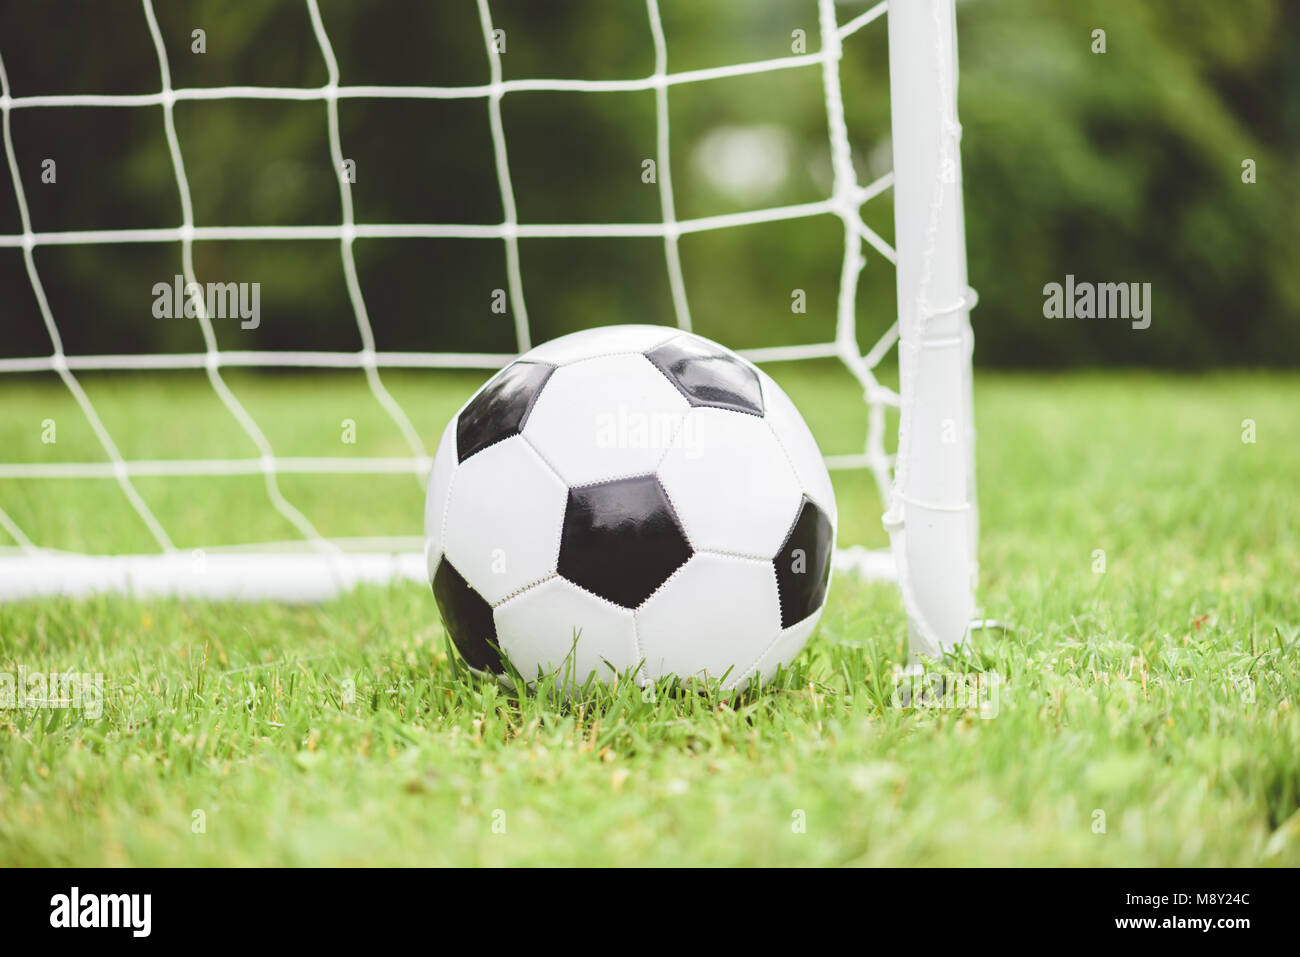 Concept for amateur football (soccer) league with ball and small goal with white net Stock Photo